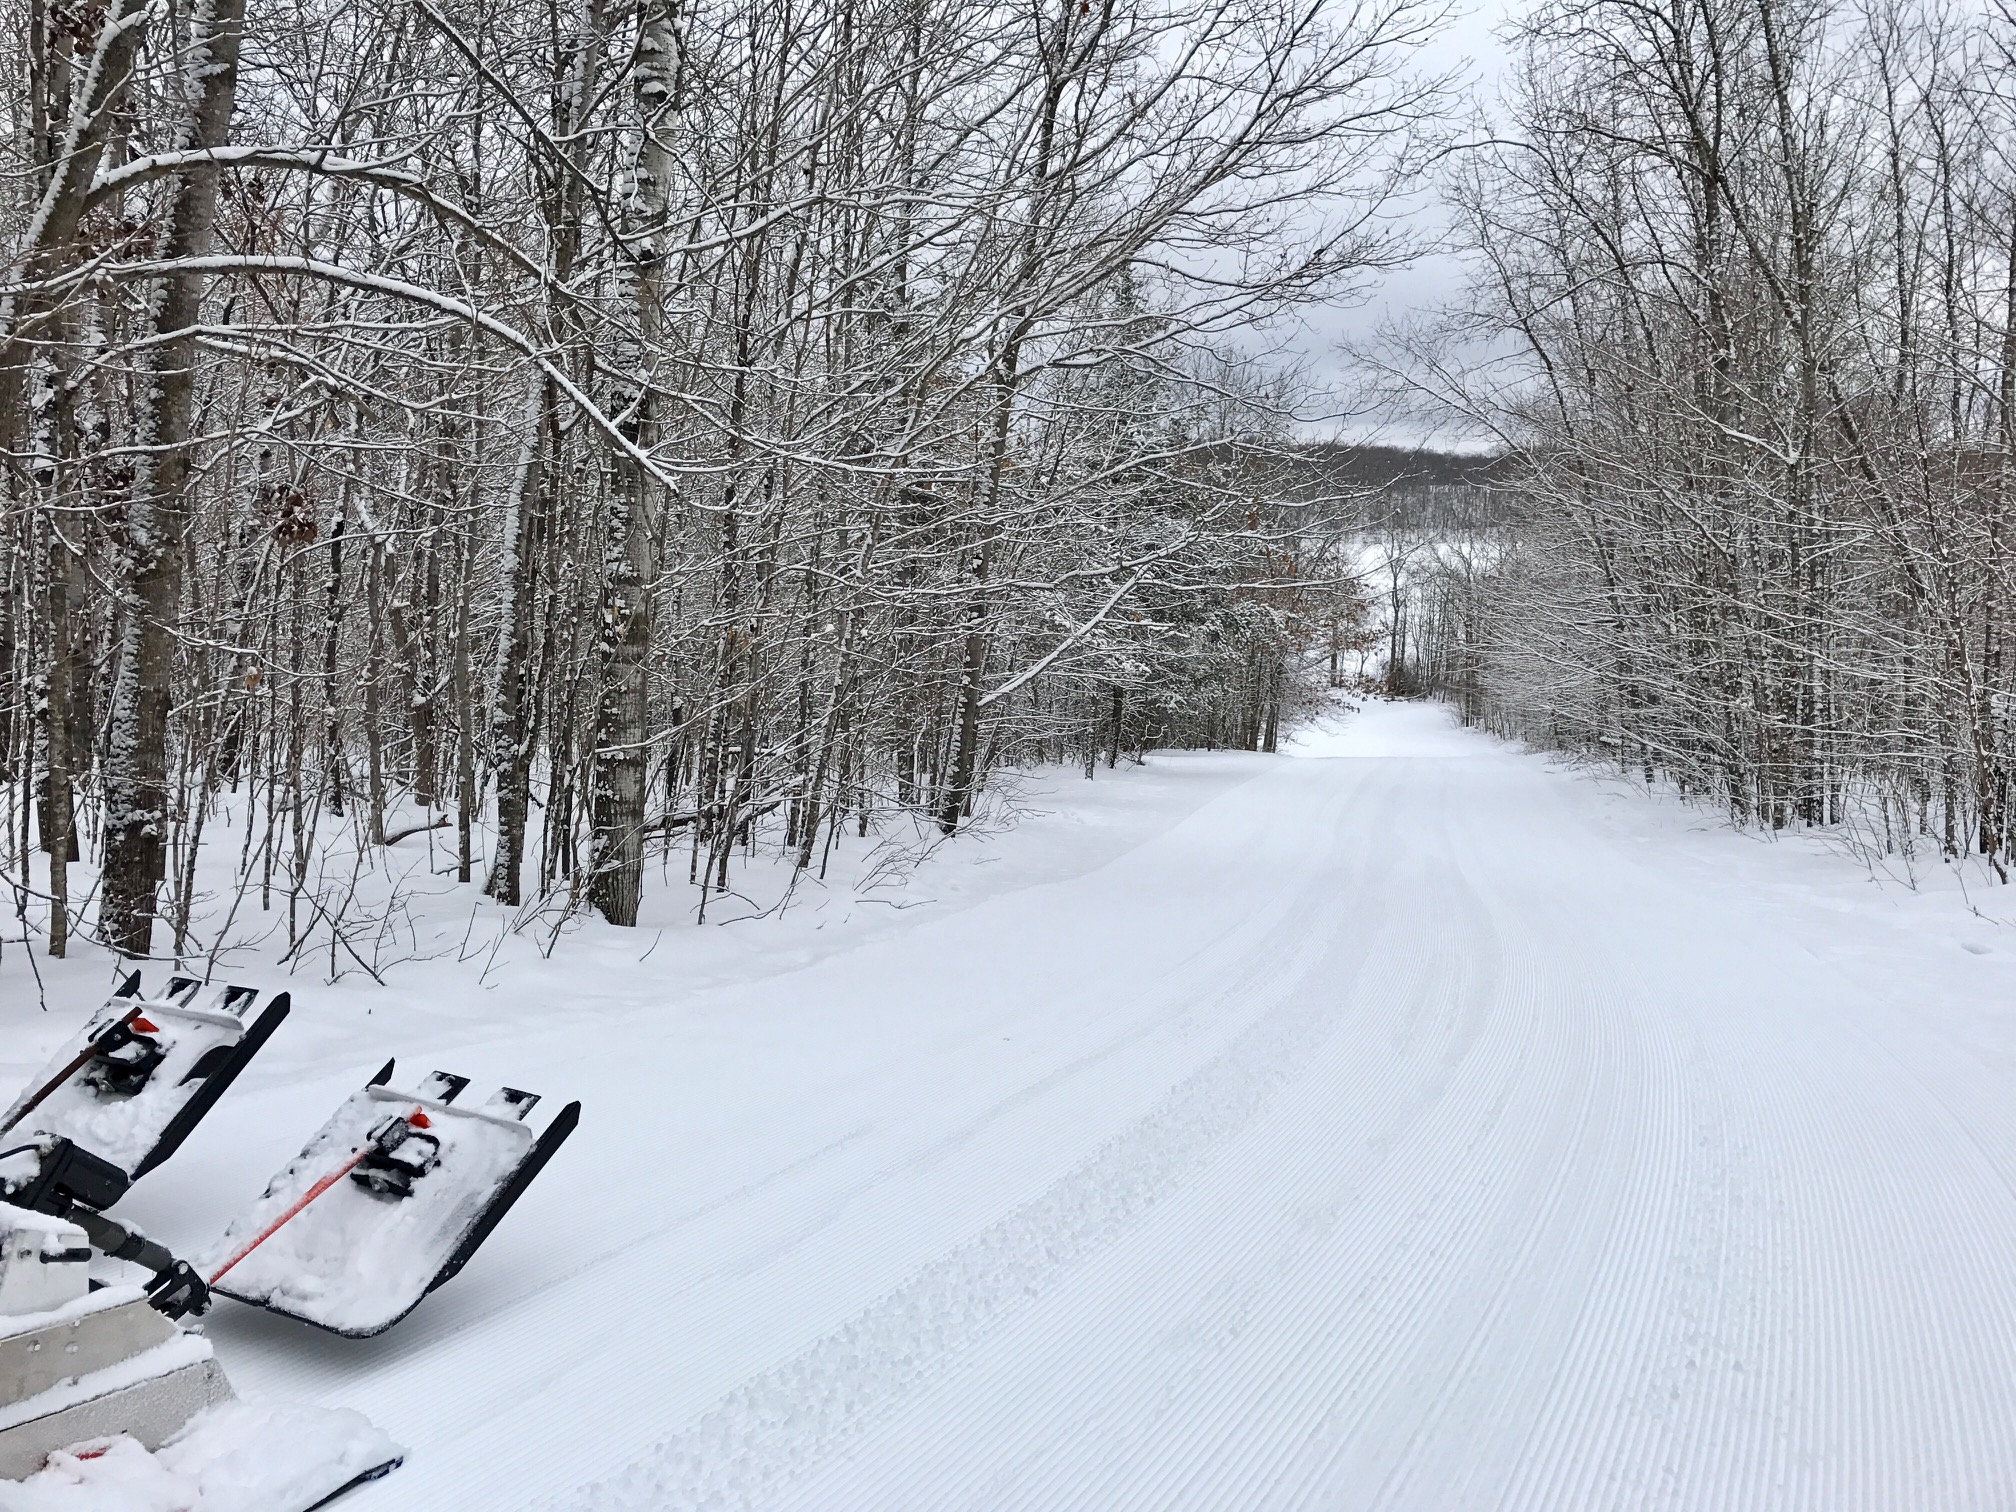 Suicide Hill after fresh grooming, January 31st, 2017.